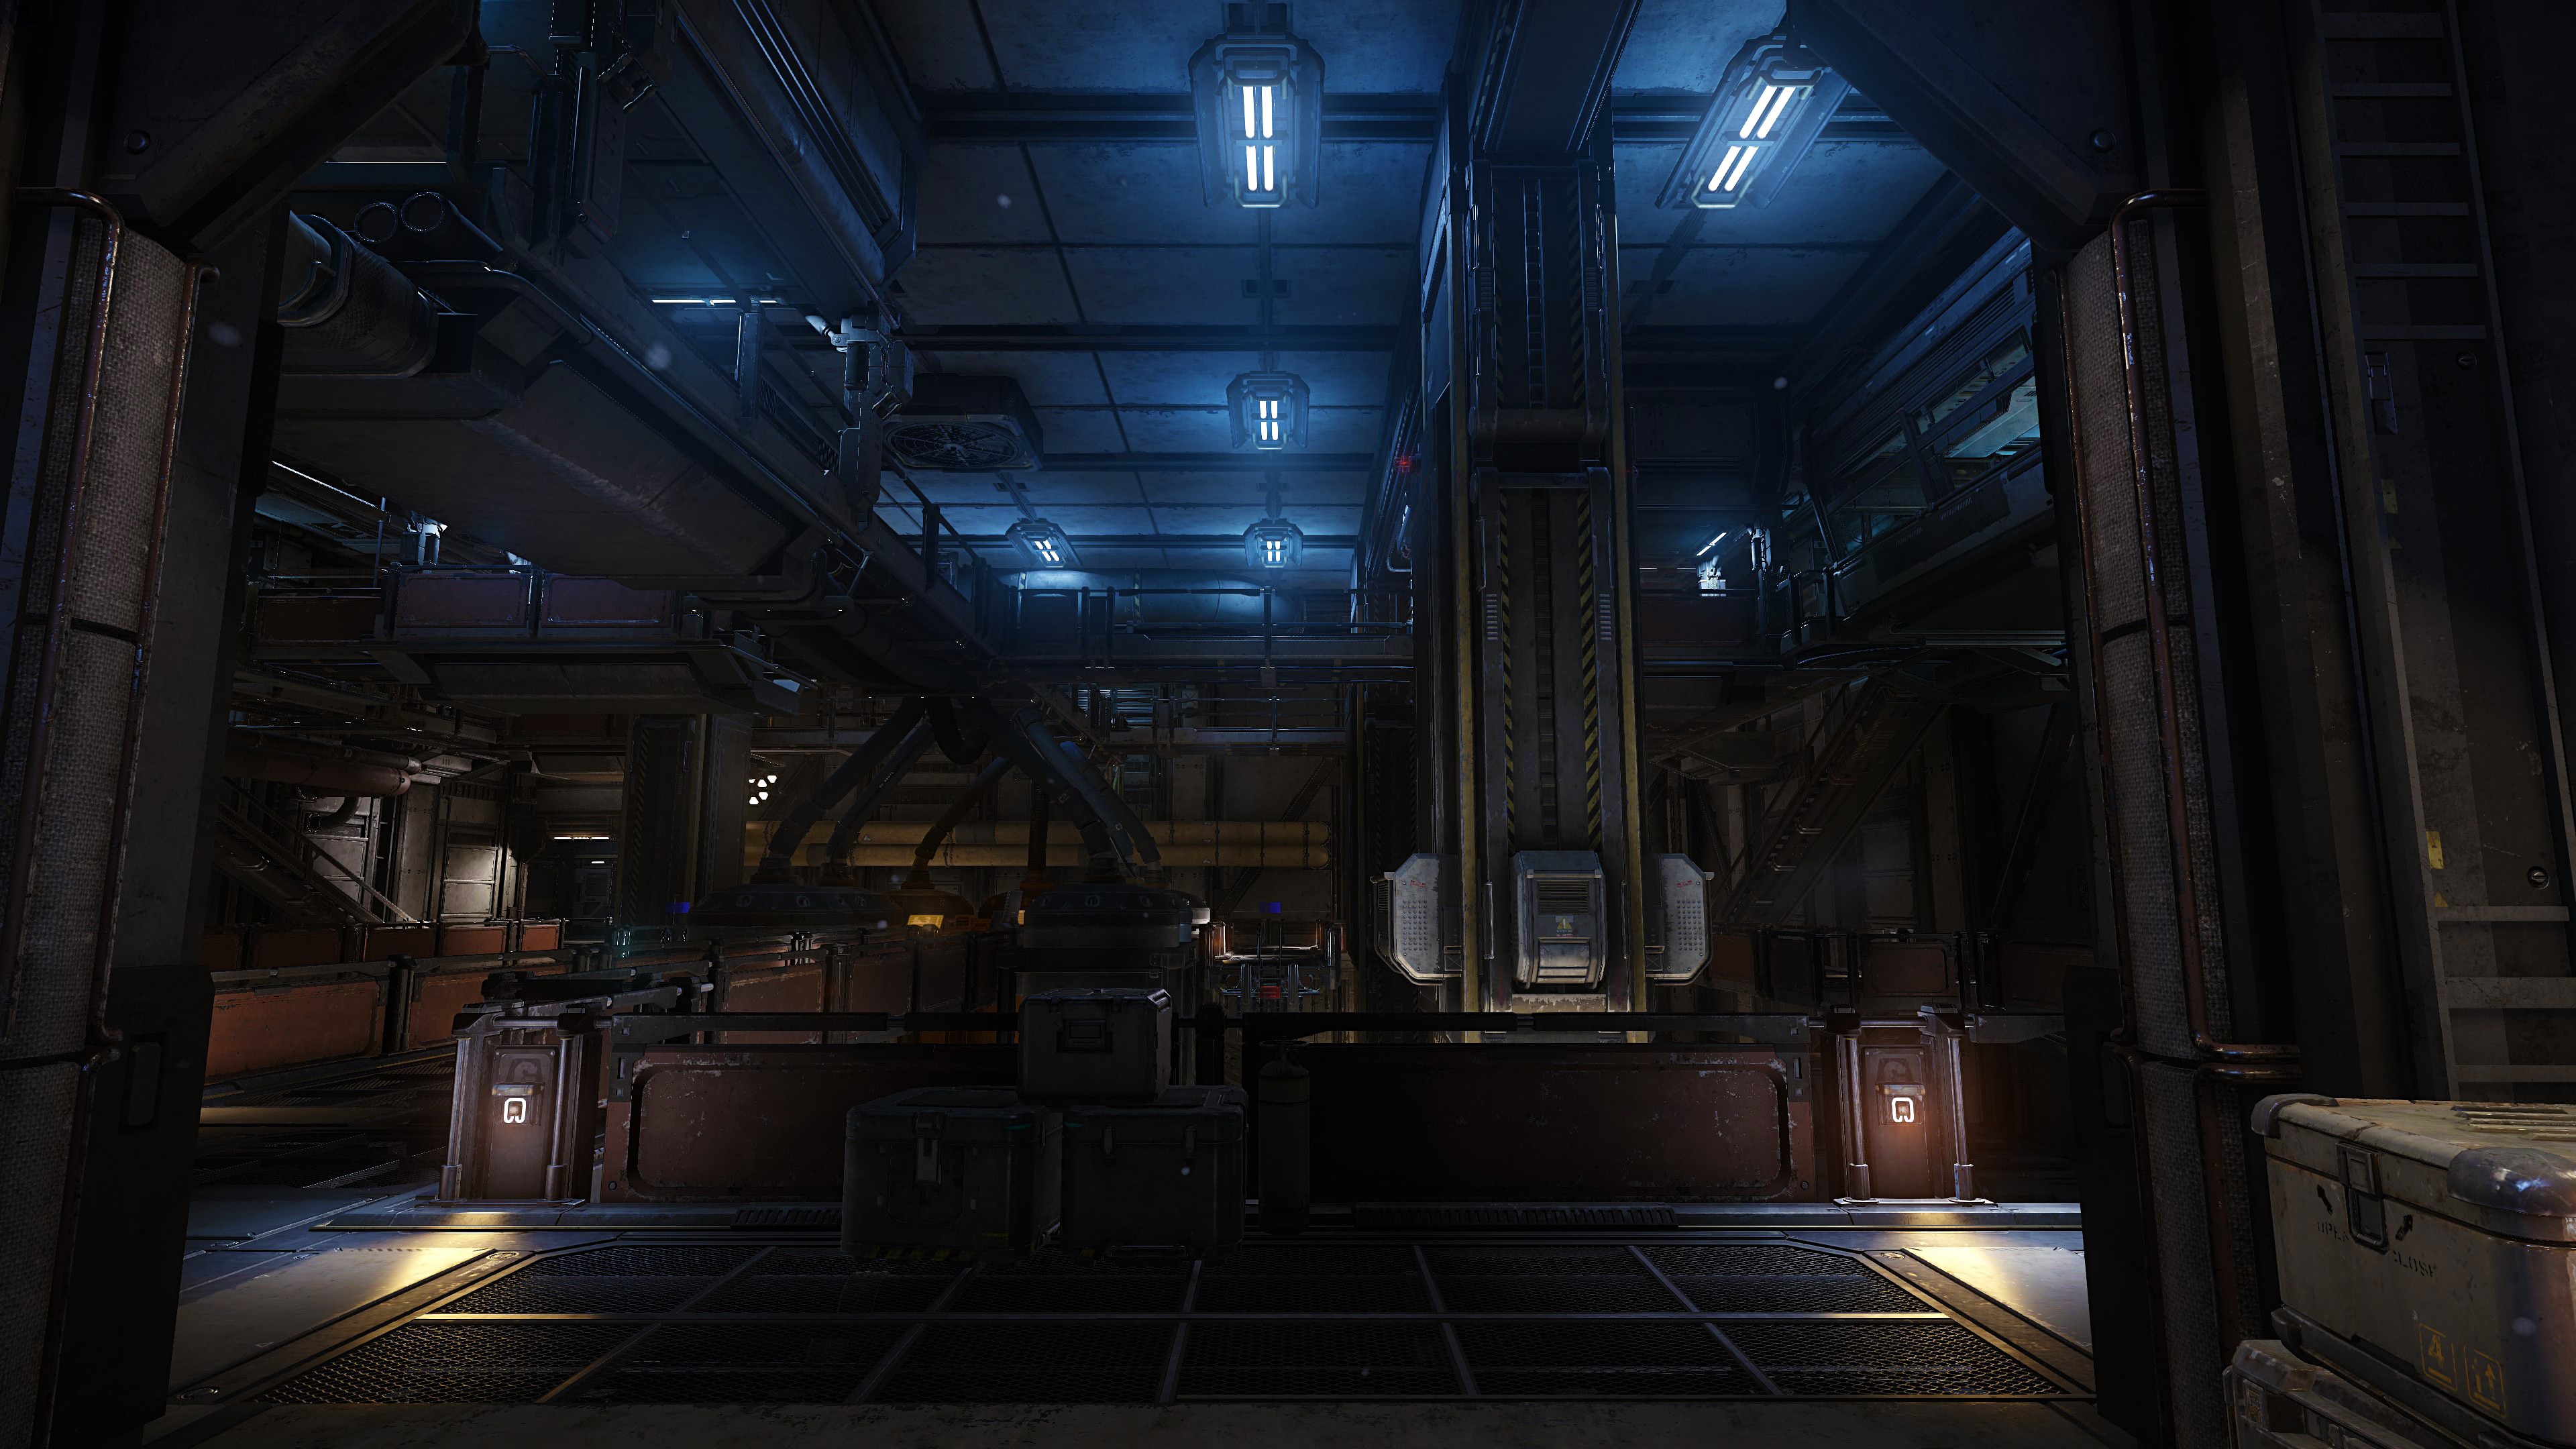 General 3840x2160 Star Citizen futuristic science fiction video games screen shot CryEngine  PC gaming